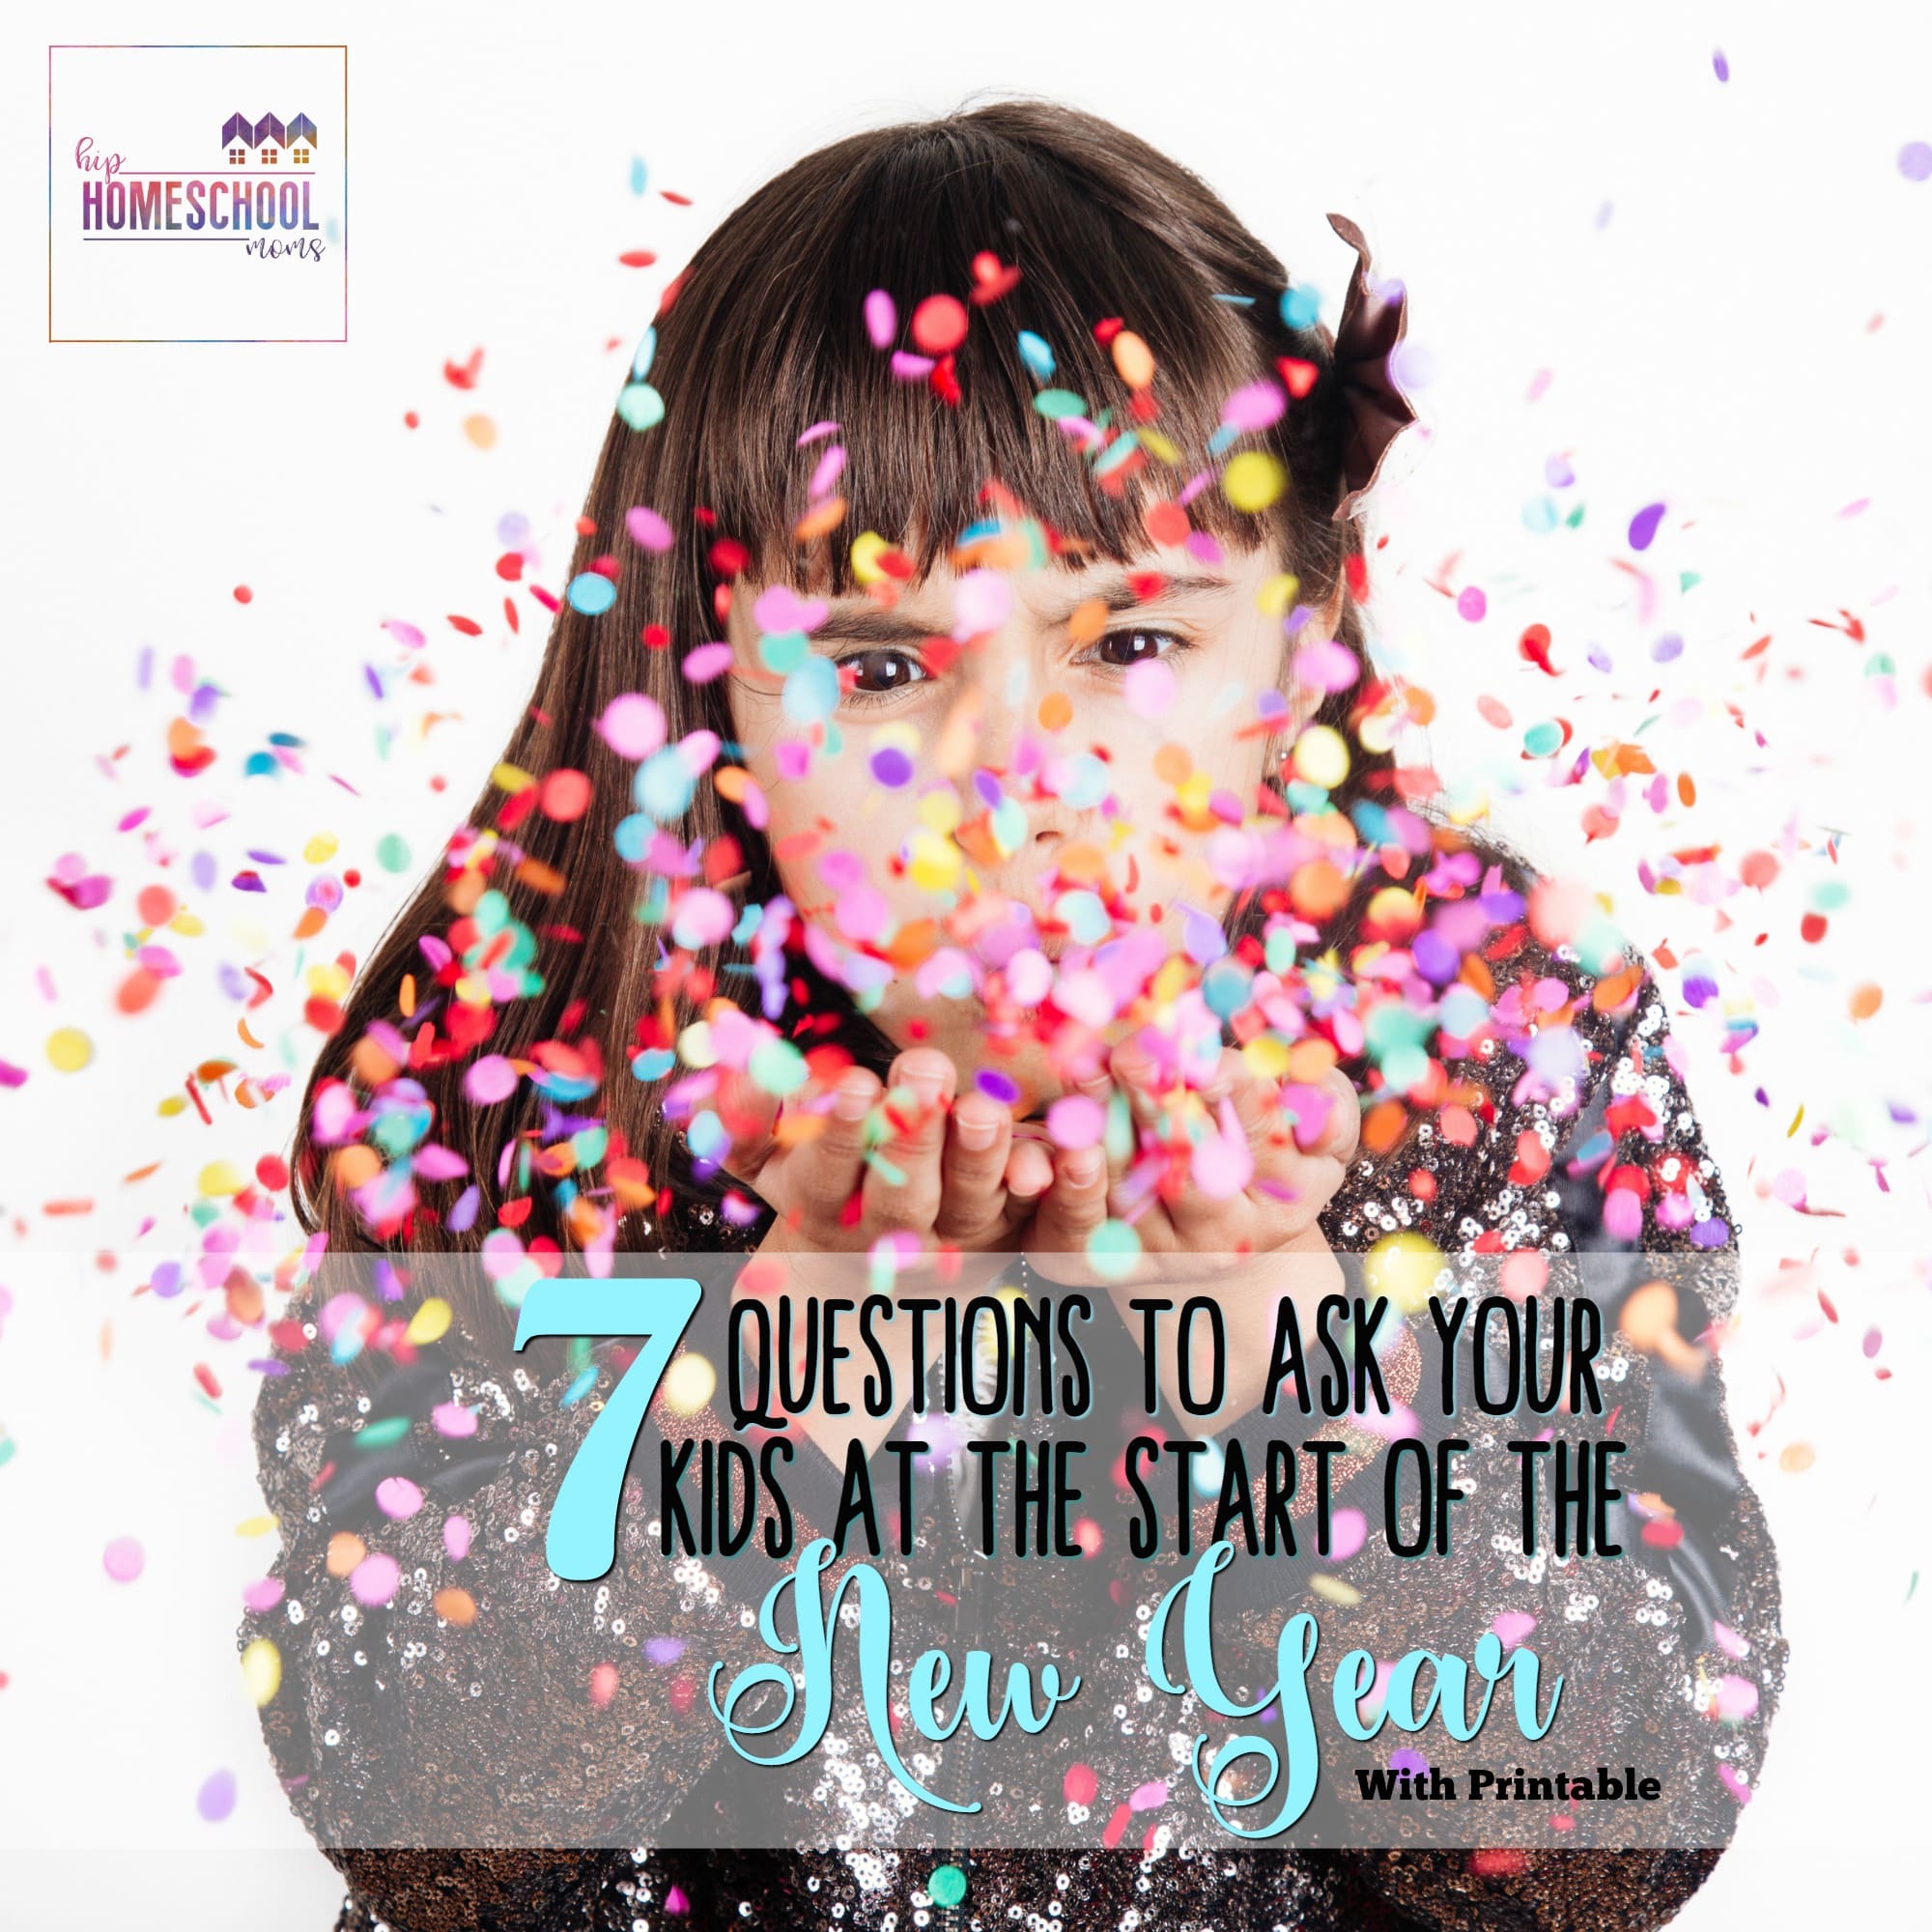 7 Questions to Ask Your Kids at the Start of the New Year (with Printable)